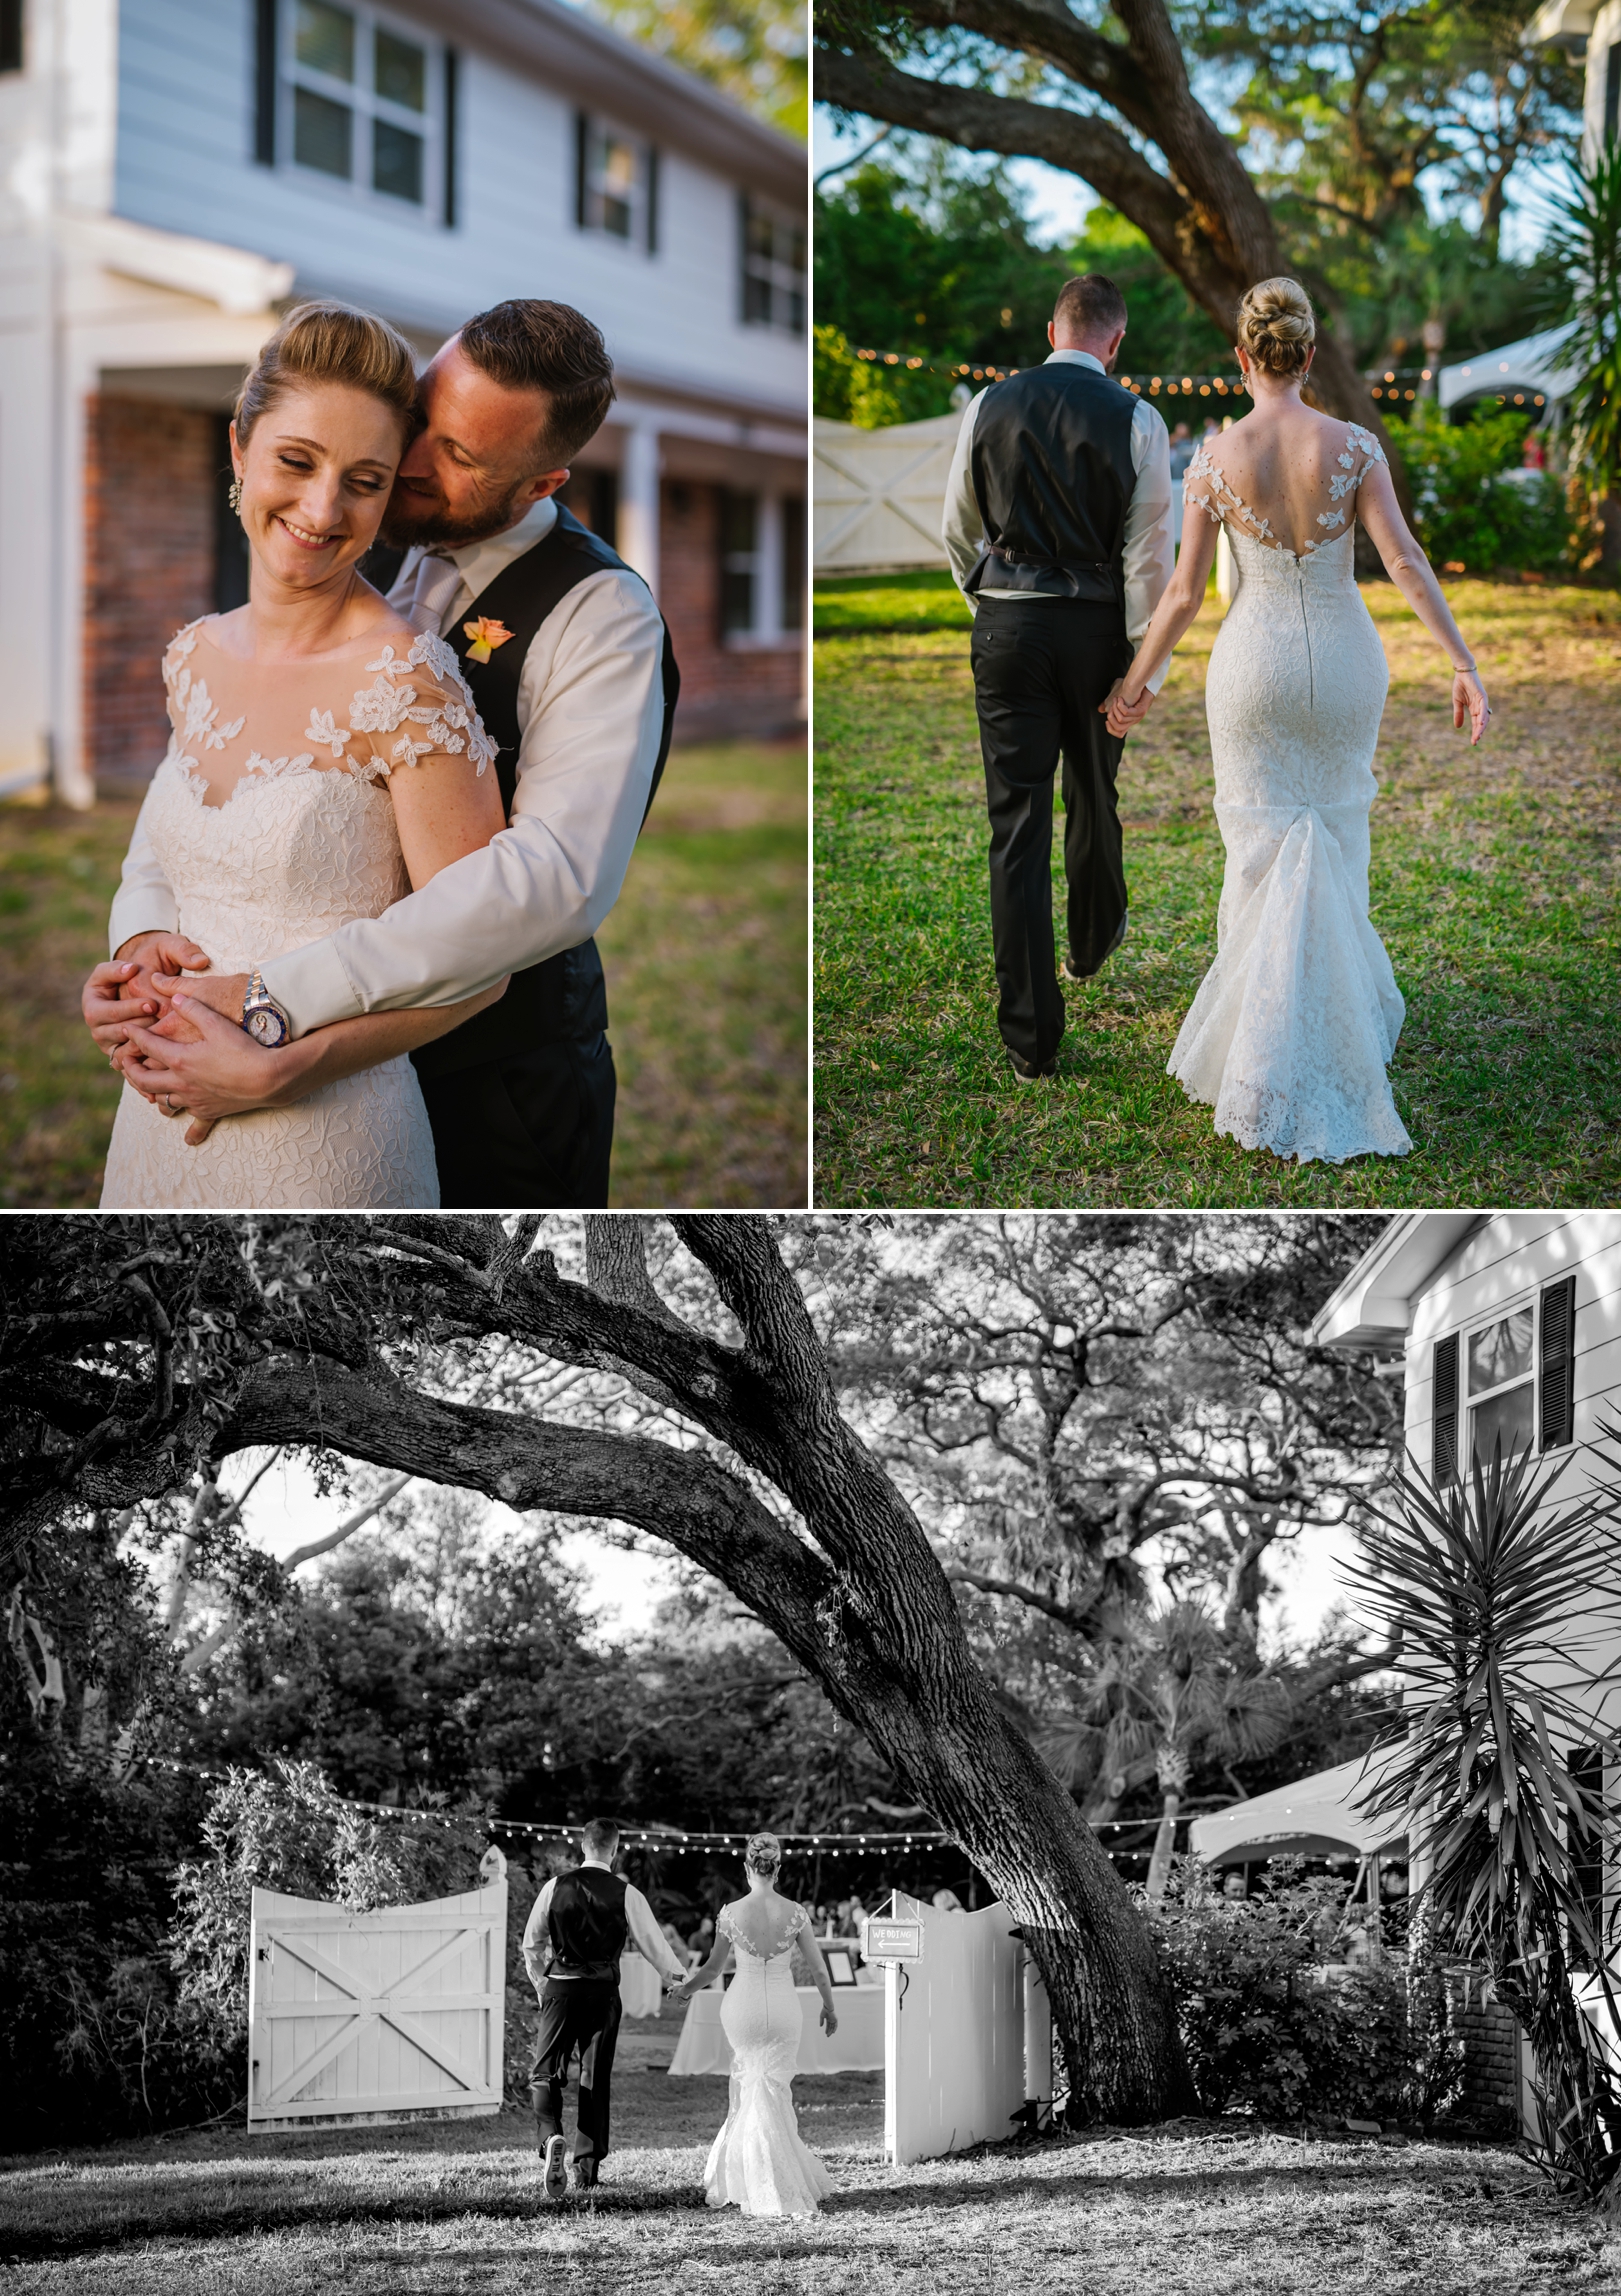 ashlee-hamon-photography-tampa-contemporary-colorful-bed-and-breakfast-wedding_0031.jpg